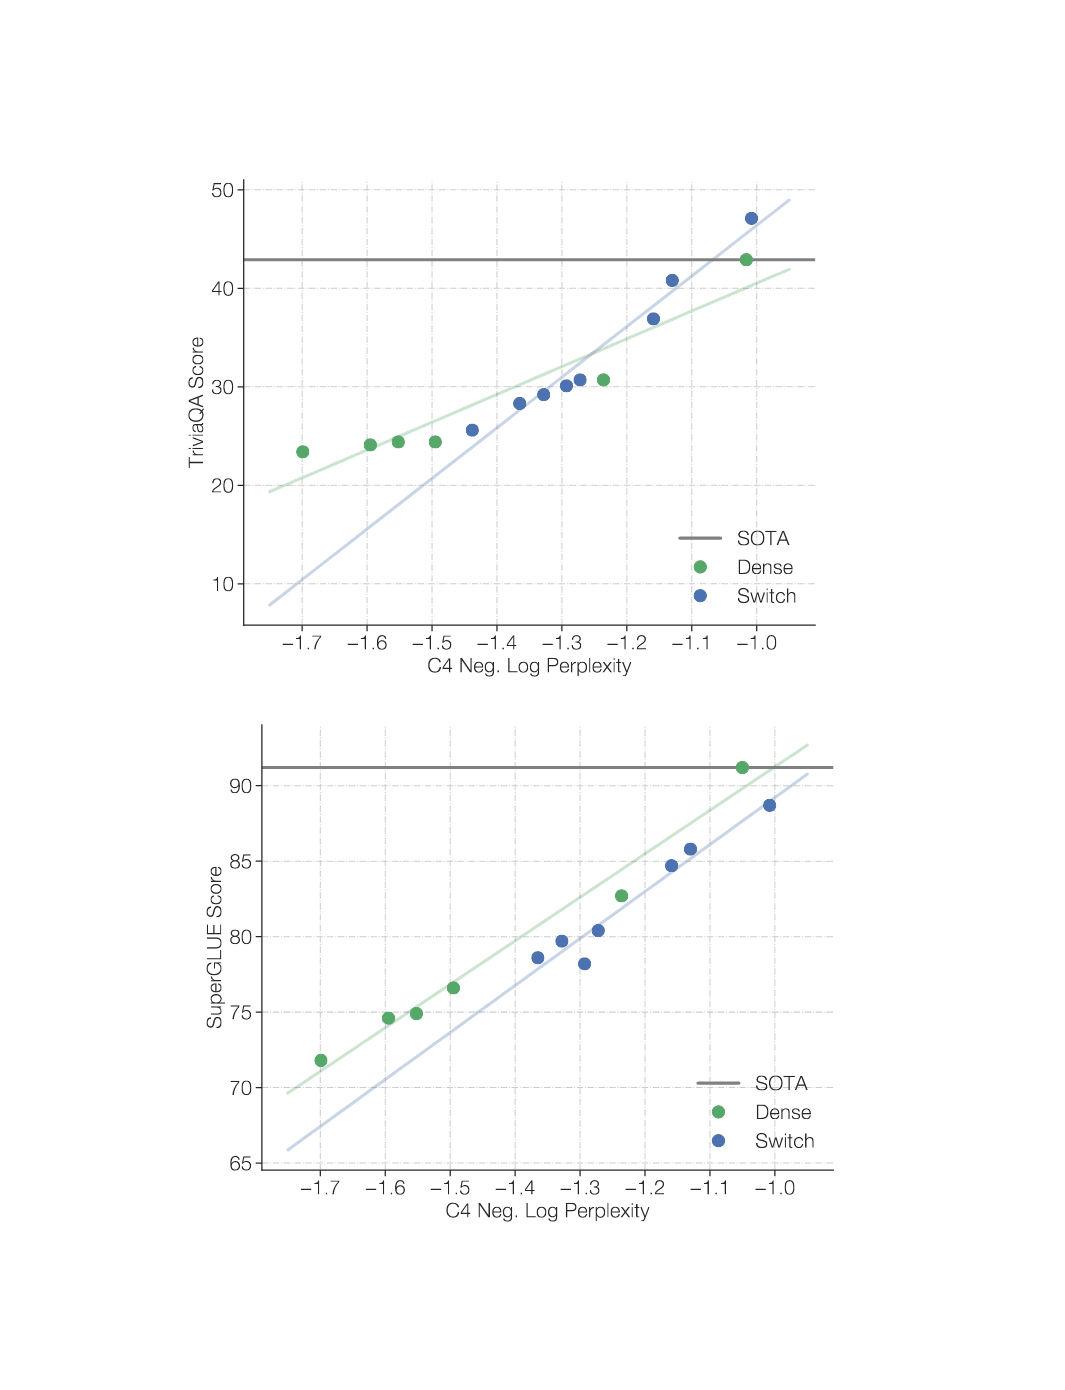 Figure 13: Upstream pre-trained quality to downstream model quality. We correlate the upstream performance with downstream quality on both SuperGLUE and TriviaQA (SOTA recorded without SSM), reasoning and knowledge-heavy benchmarks, respectively (validation sets). We find that, as with the baseline, the Switch model scales with improvements in the upstream pre-training task. For SuperGLUE, we find a loosely linear relation between negative log perplexity and the average SuperGLUE score. However, the dense model often performs better for a fixed perplexity, particularly in the large-scale regime. Conversely, on the knowledge-heavy task, TriviaQA, we find that the Switch Transformer may follow an improved scaling relationship—for a given upstream perplexity, it does better than a dense counterpart. Further statistics (expensive to collect and left to future work) would be necessary to confirm these observations.